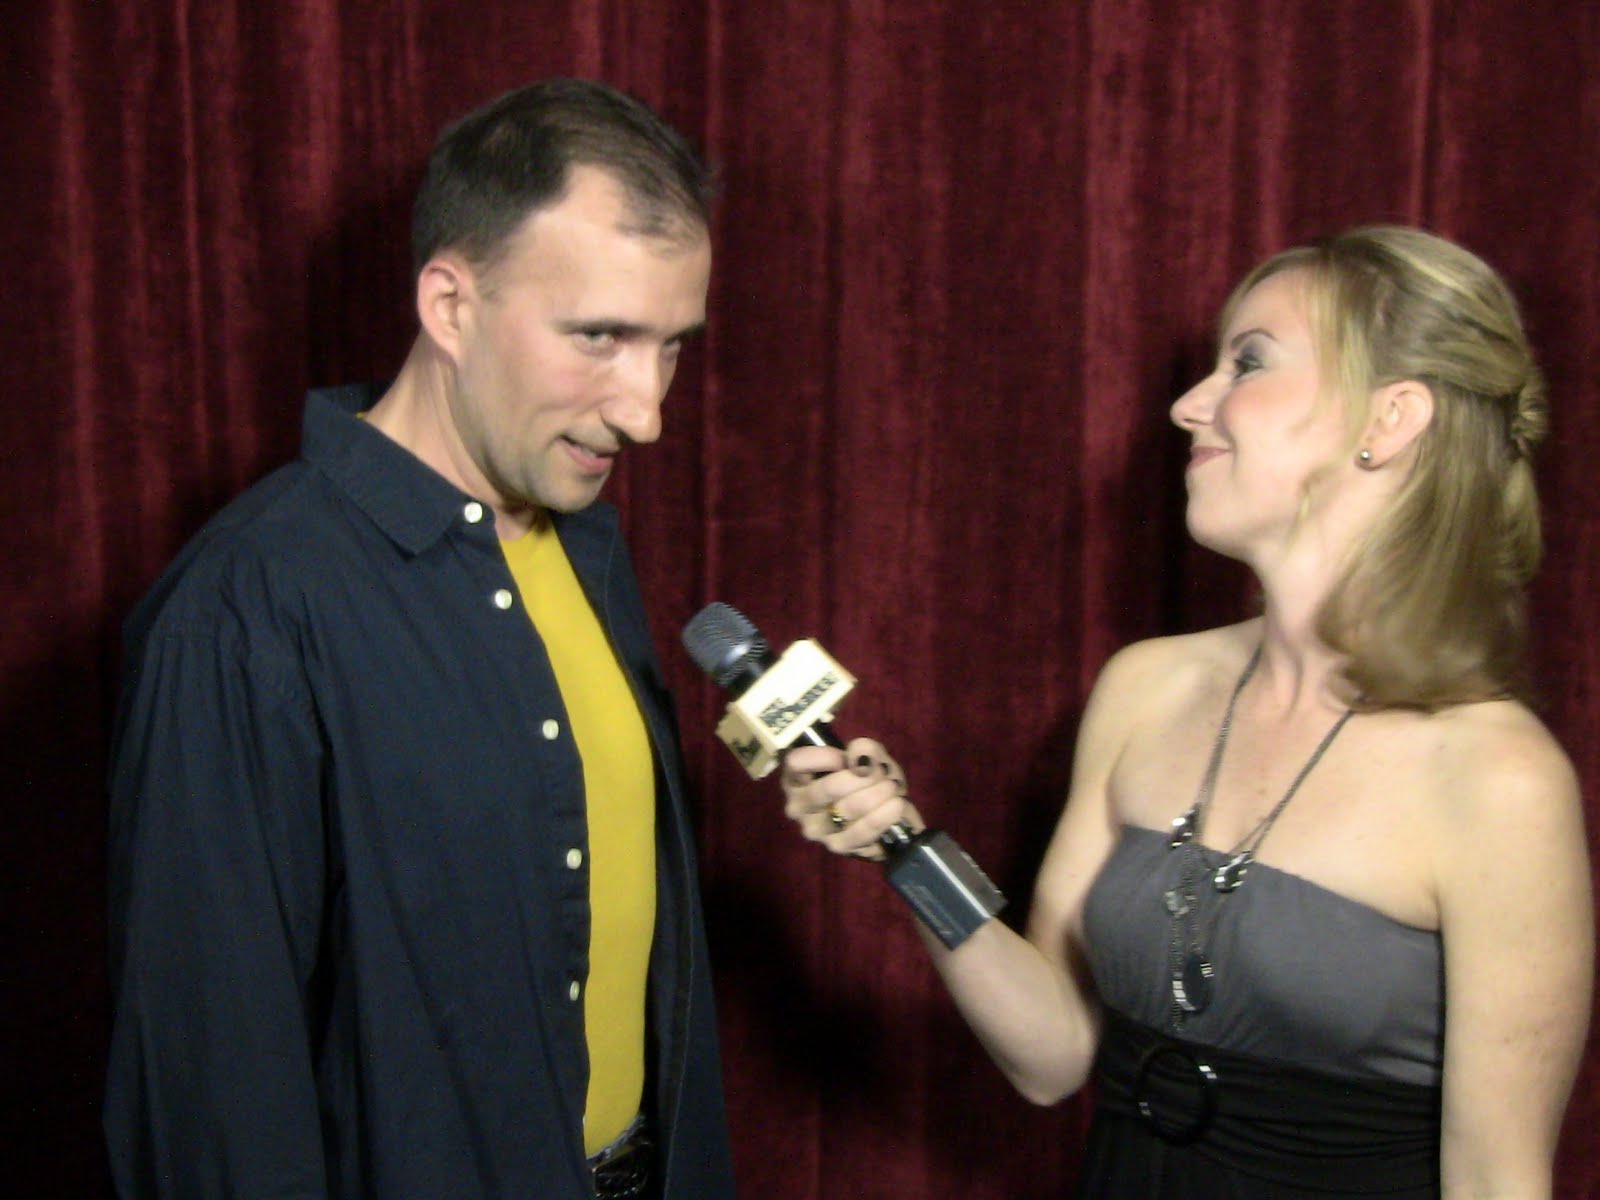 Sean Spence being interviewed by Kristyn Burtt from The Web Files at the Red Carpet Premiere of Compulsions.